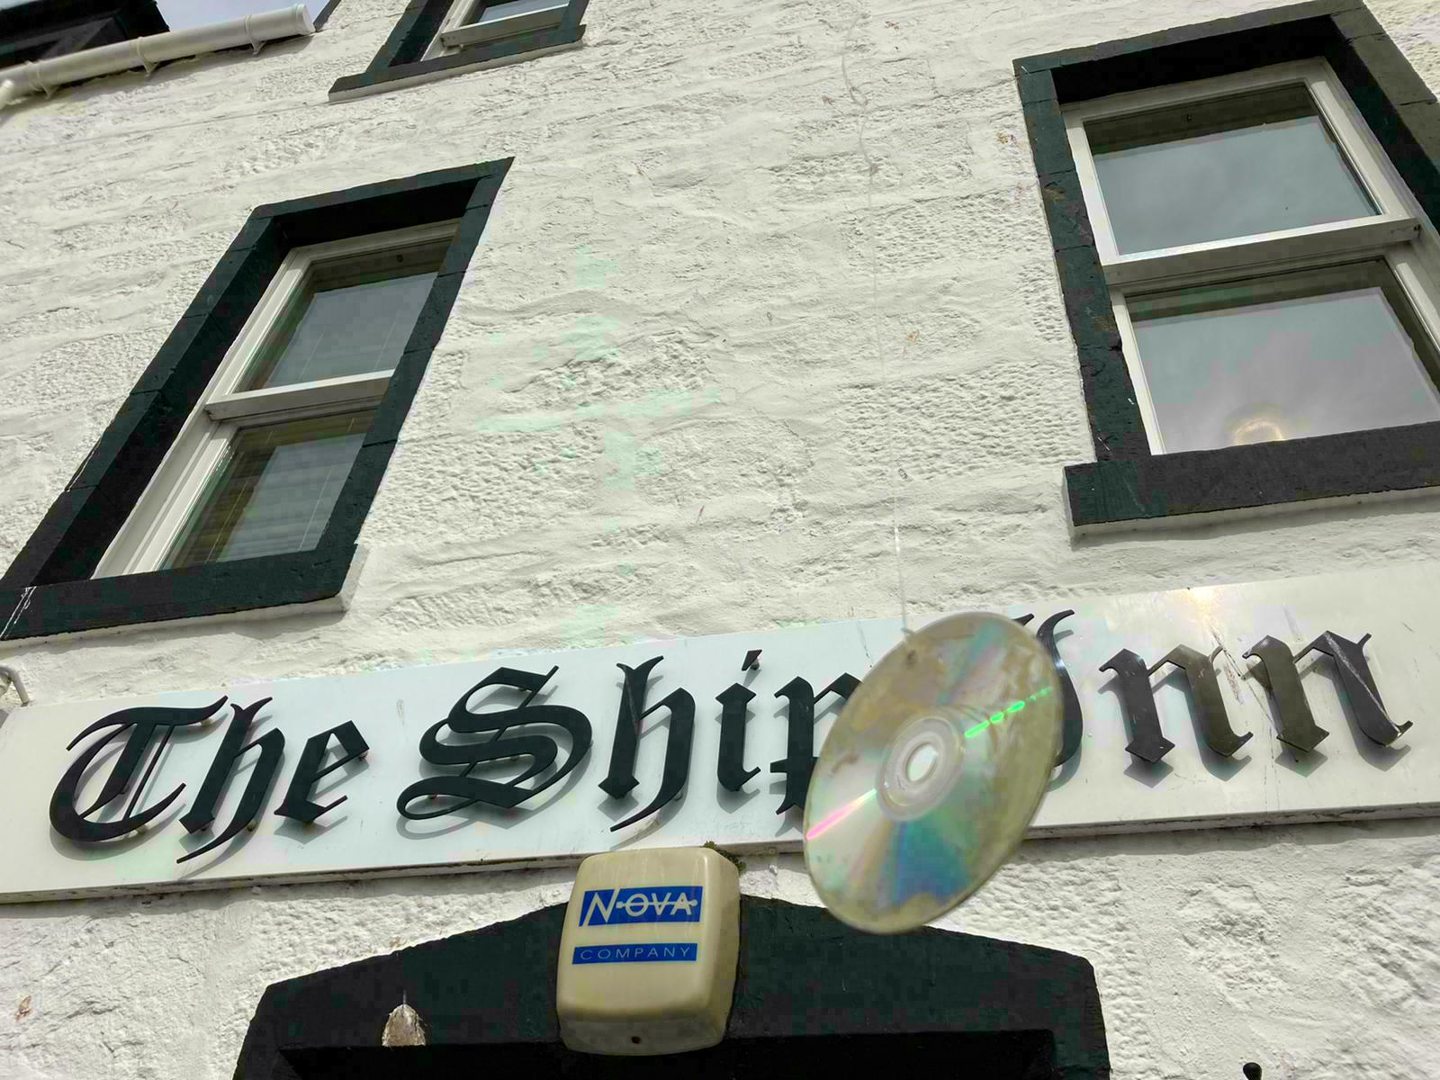 A CD dangling over the front of the Ship Inn sign.